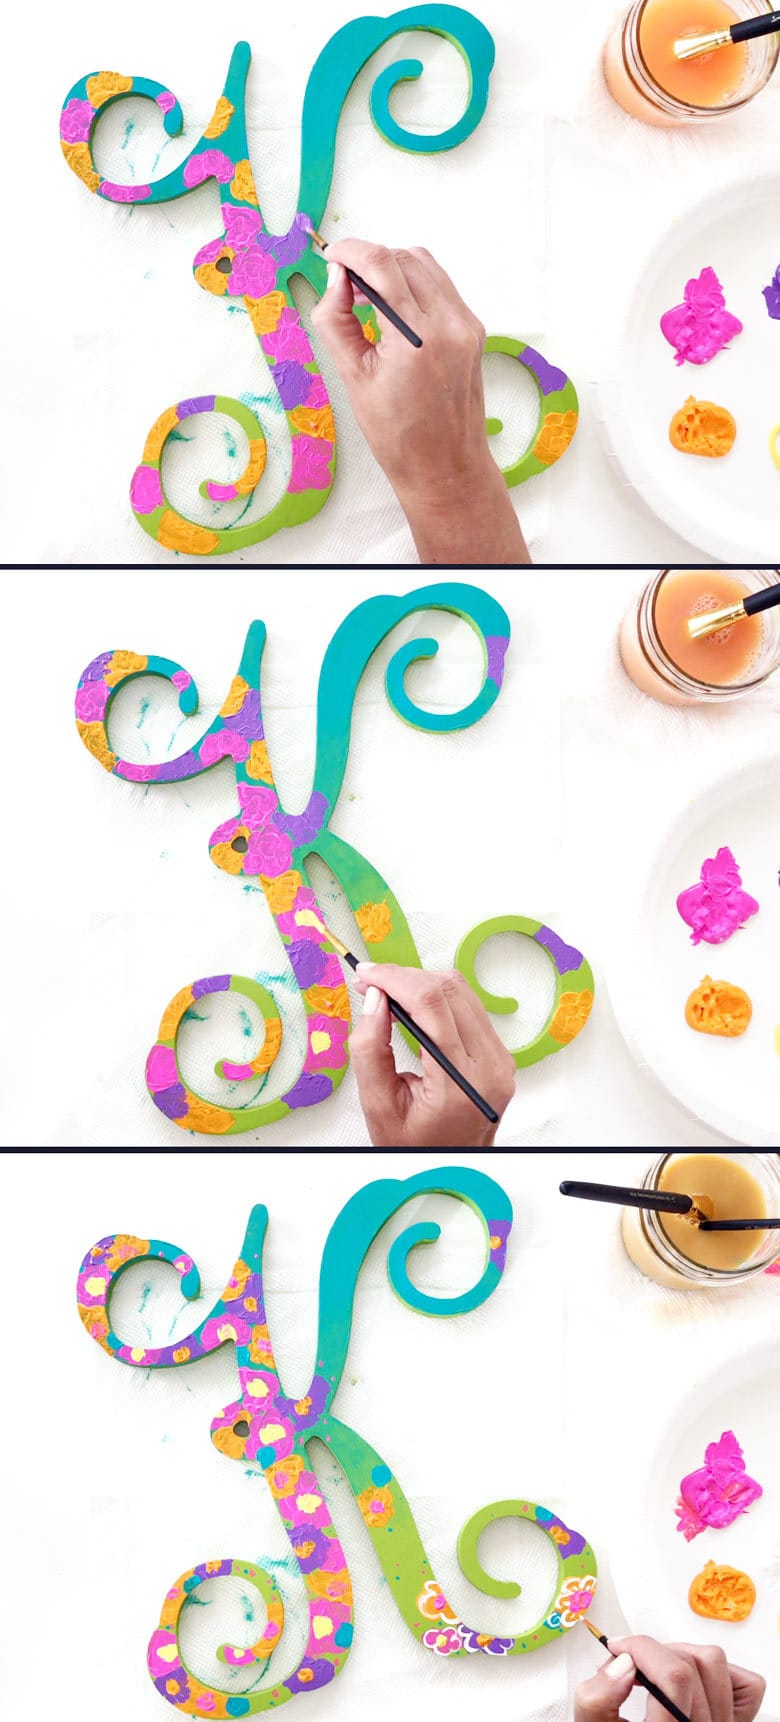 Paint different color shapes to create flowers